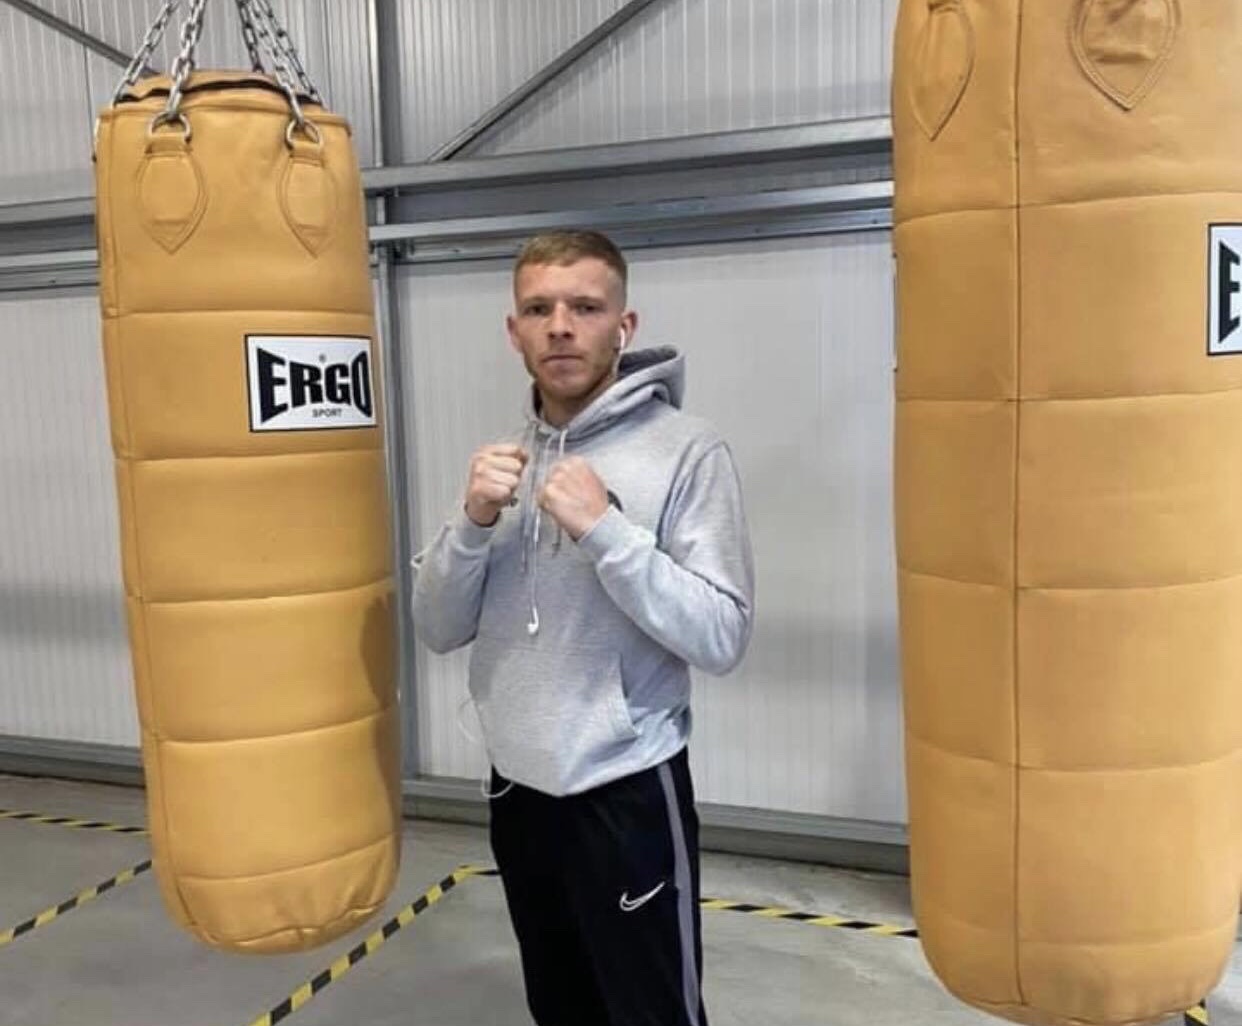 BOXING | Edmunds turns professional and looks forward to his first professional fight this weekend